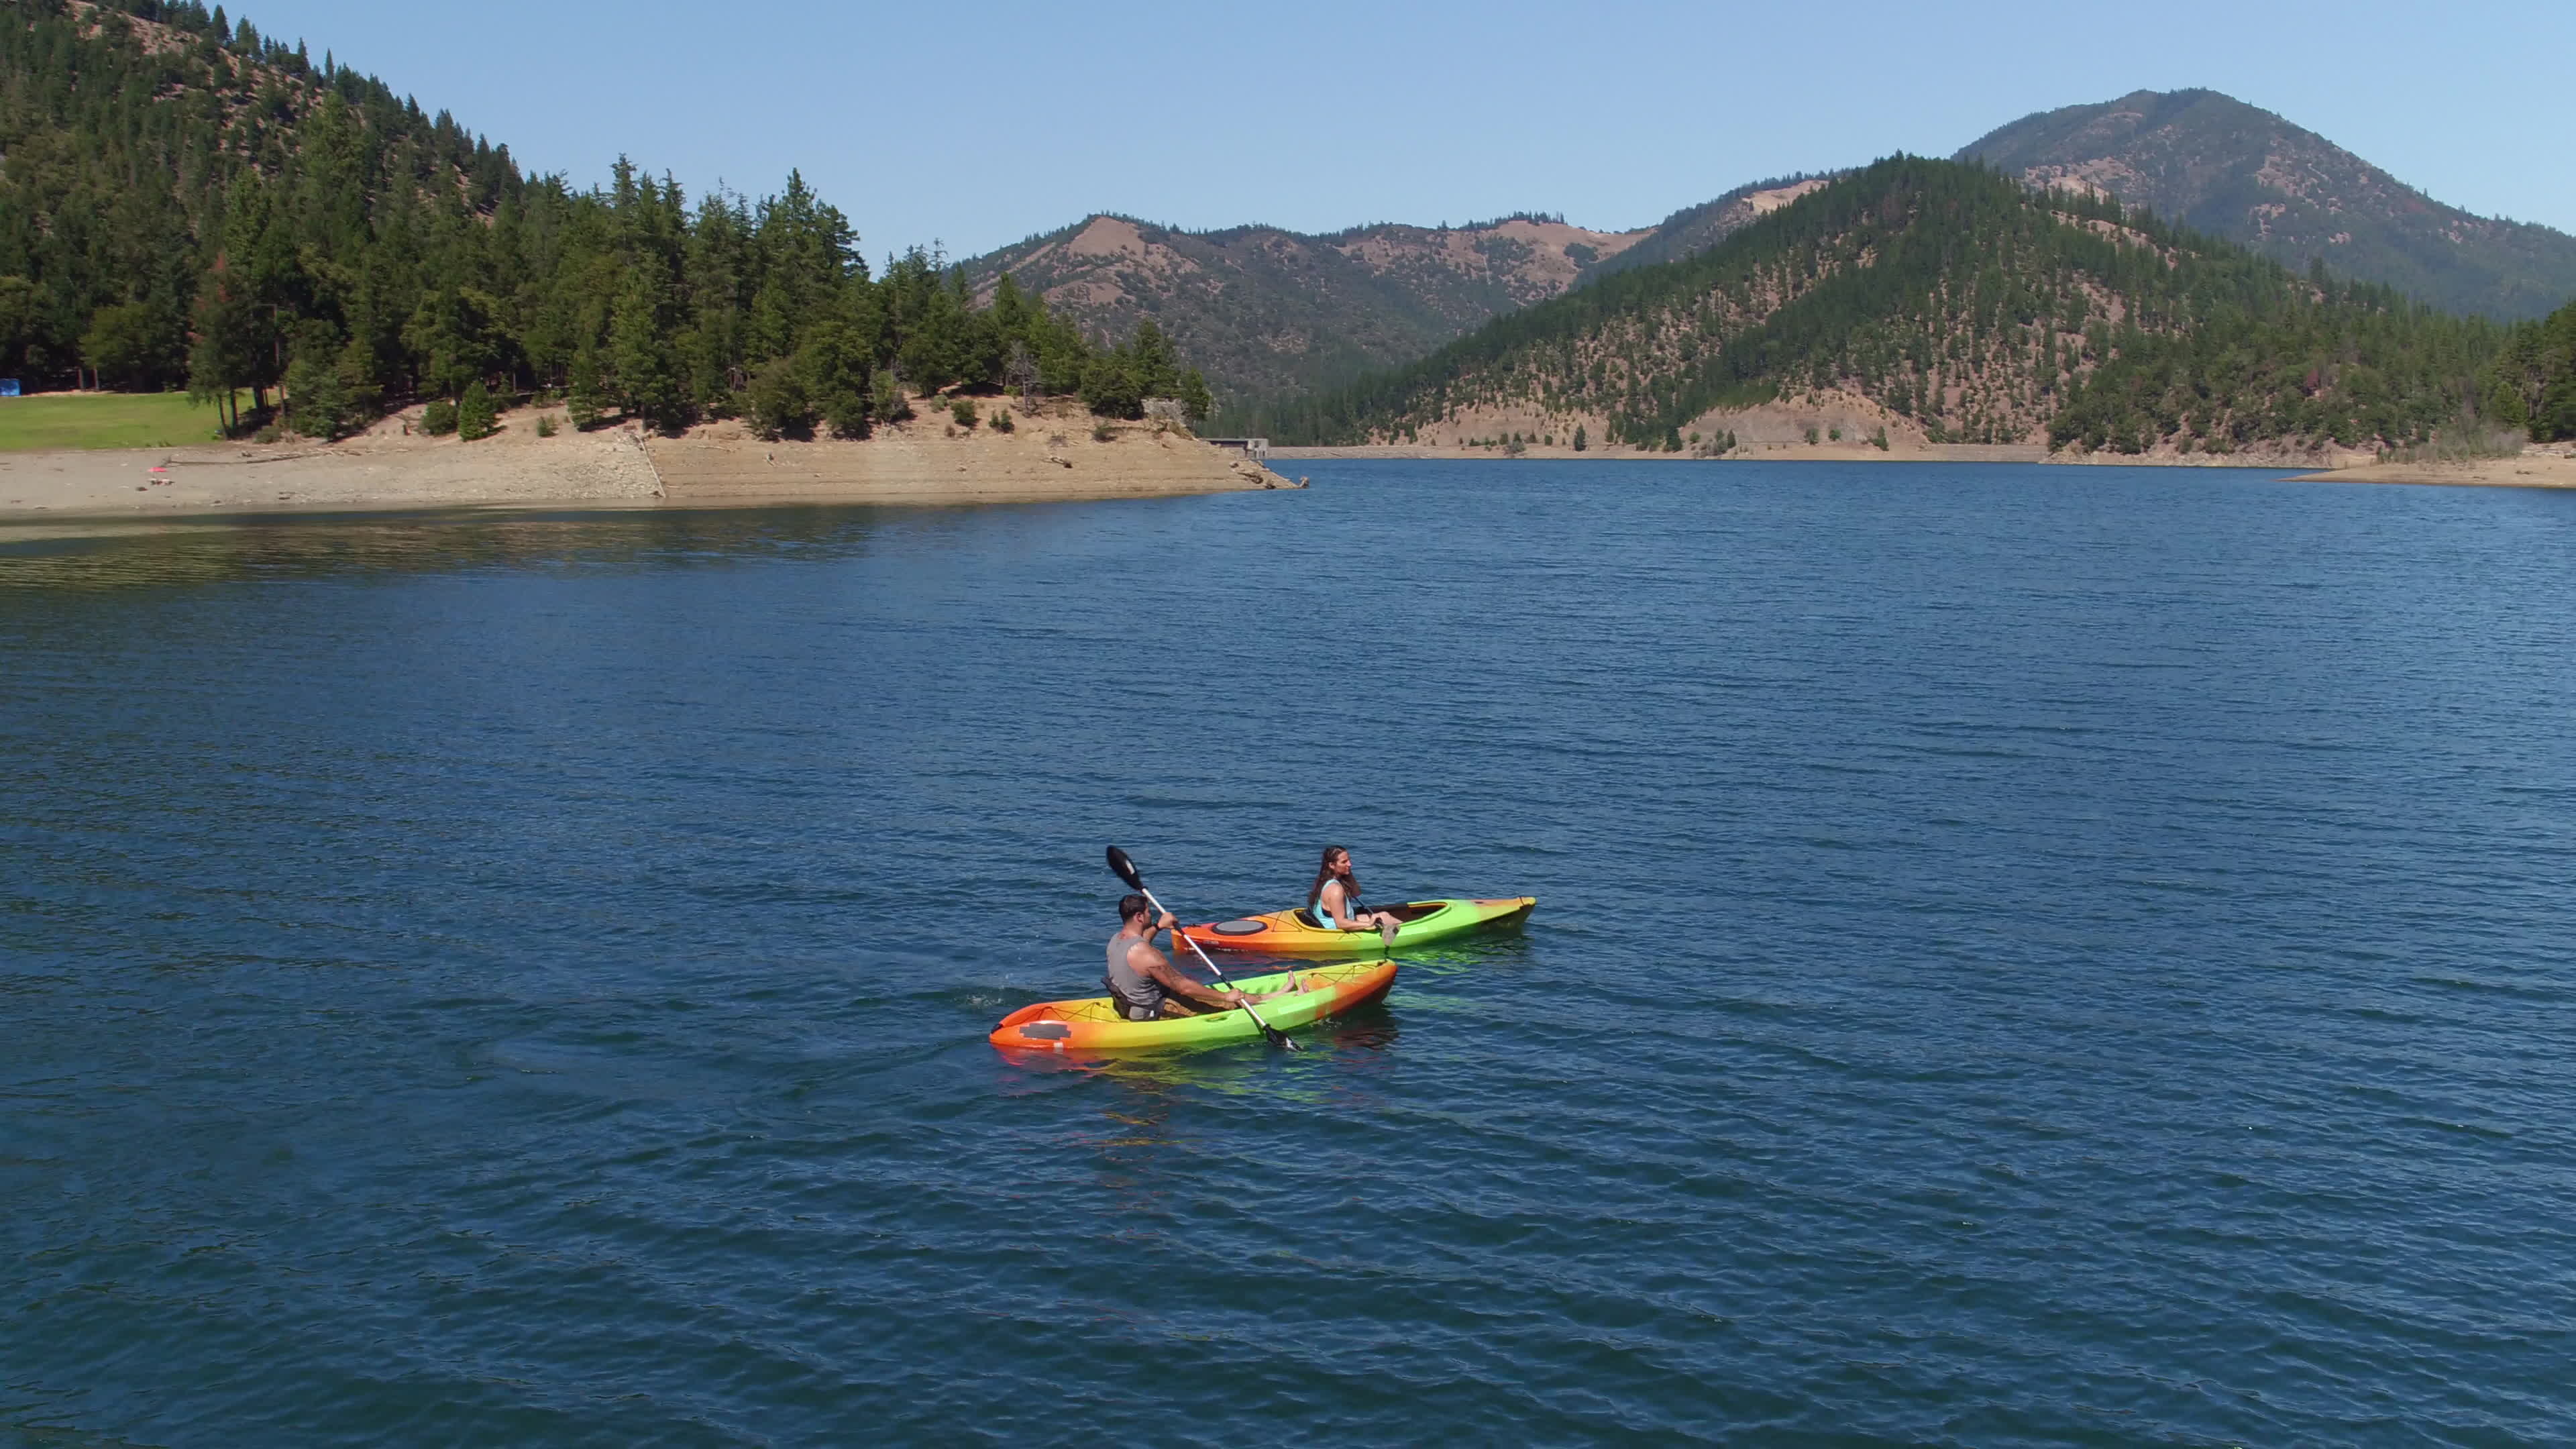 Kayaking: A couple travels across the lakes in two single-seat kayaks. 3840x2160 4K Wallpaper.